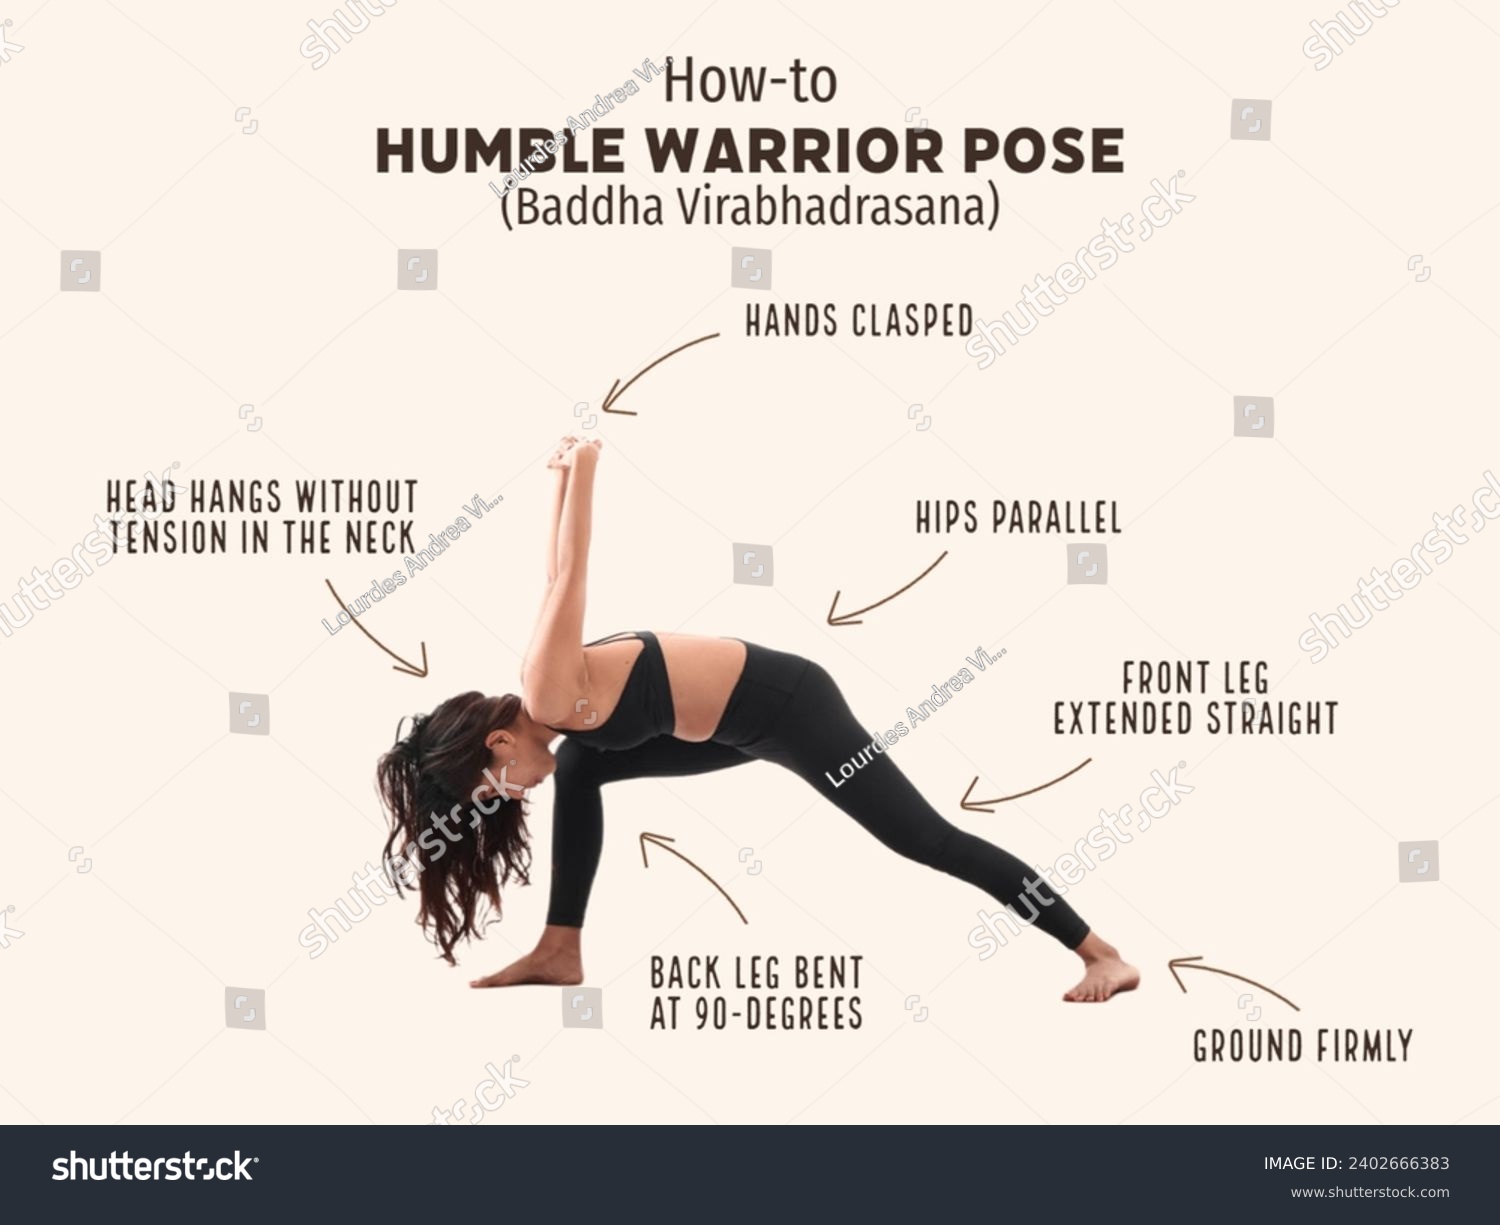 Humble Warrior pose (Baddha Virabhadrasana) is an intermediate pose that stretches the hips, strengthens the legs, and improves balance. #2402666383